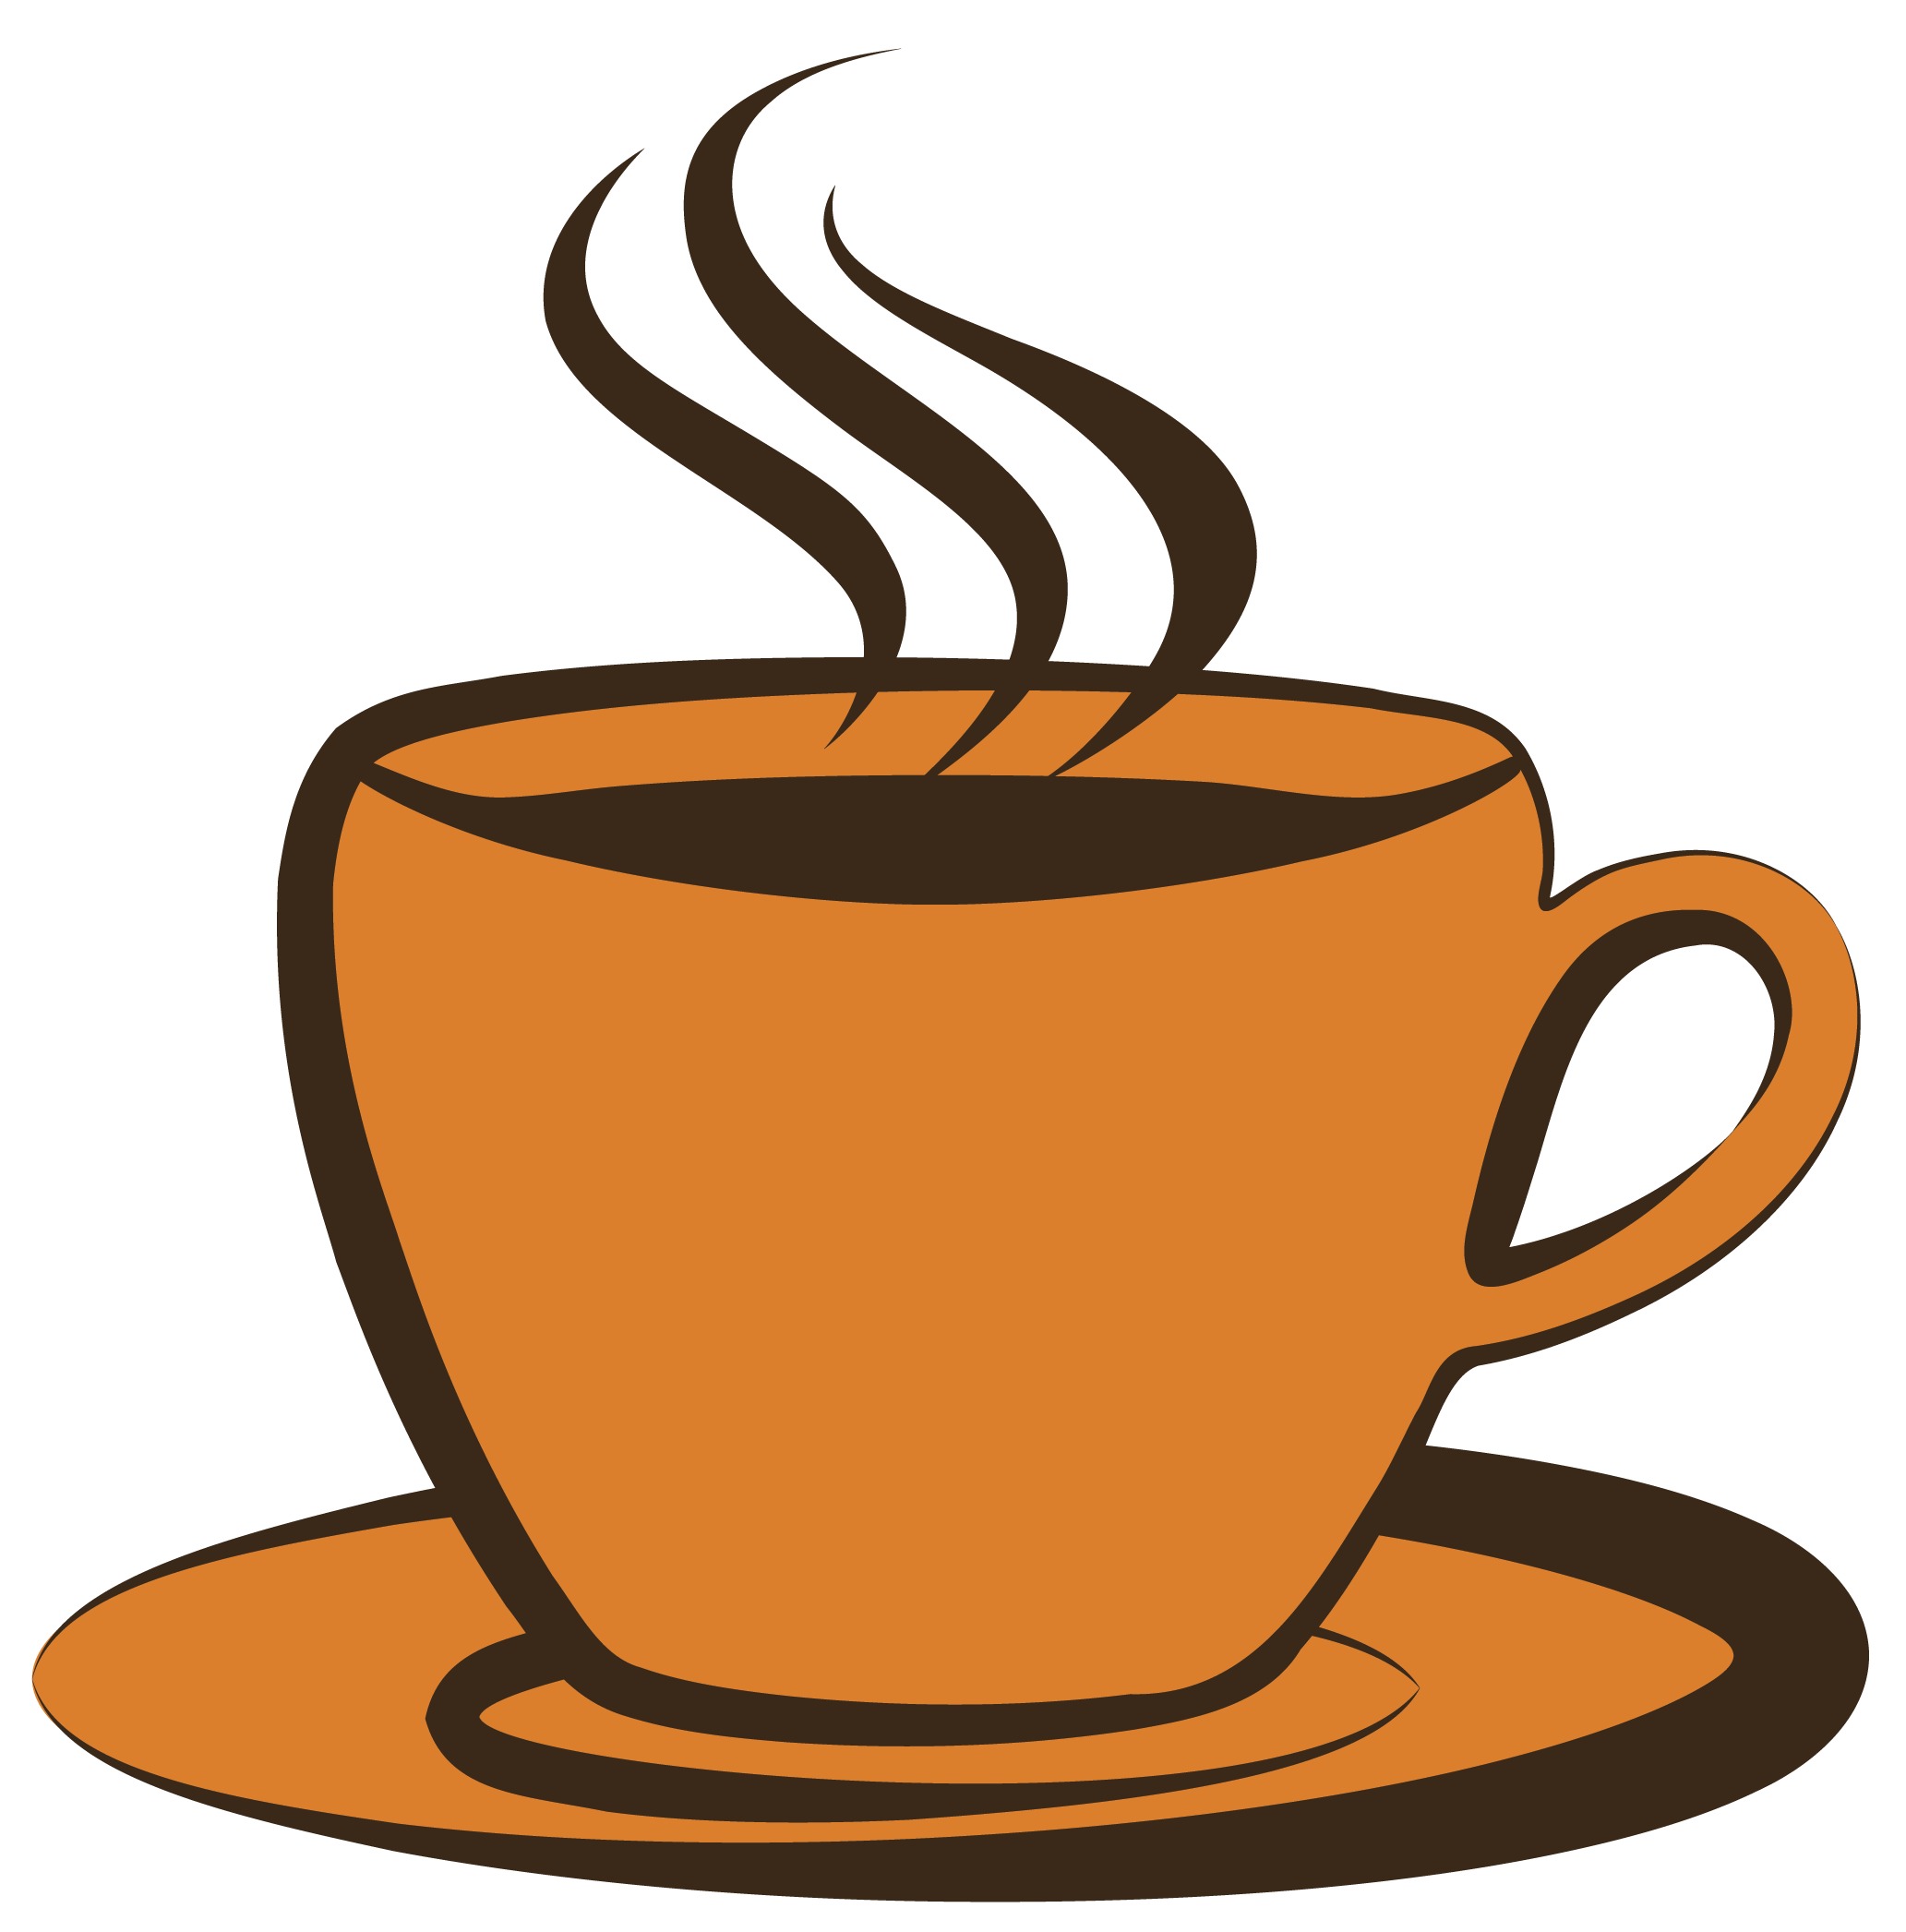 coffee-clipart-7.png